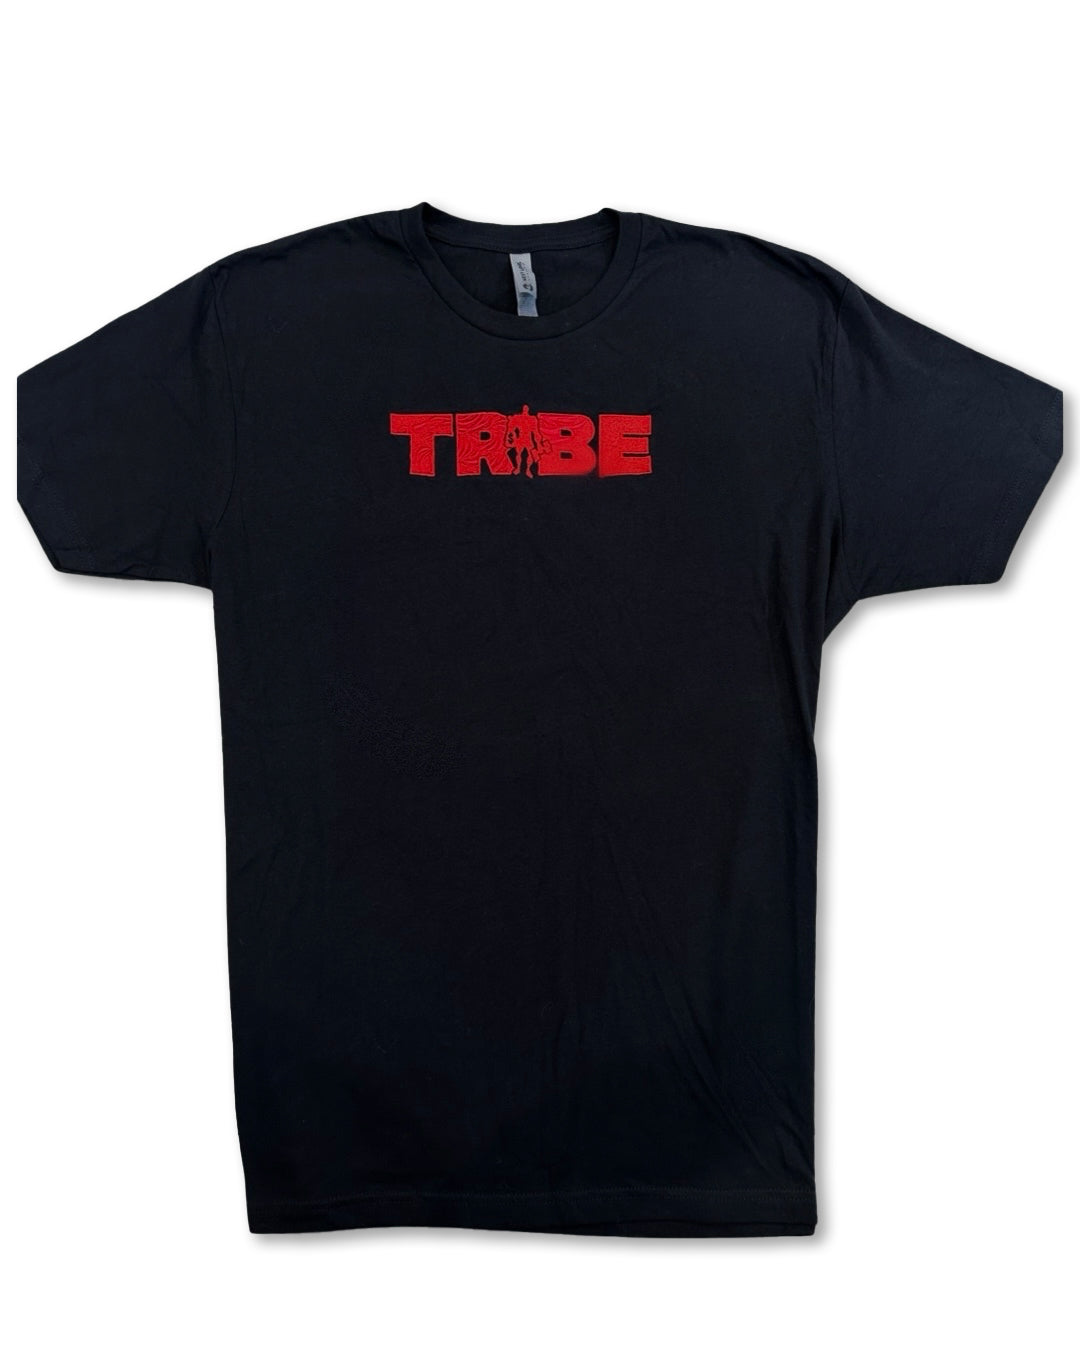 Tribe T-Shirt (RED)